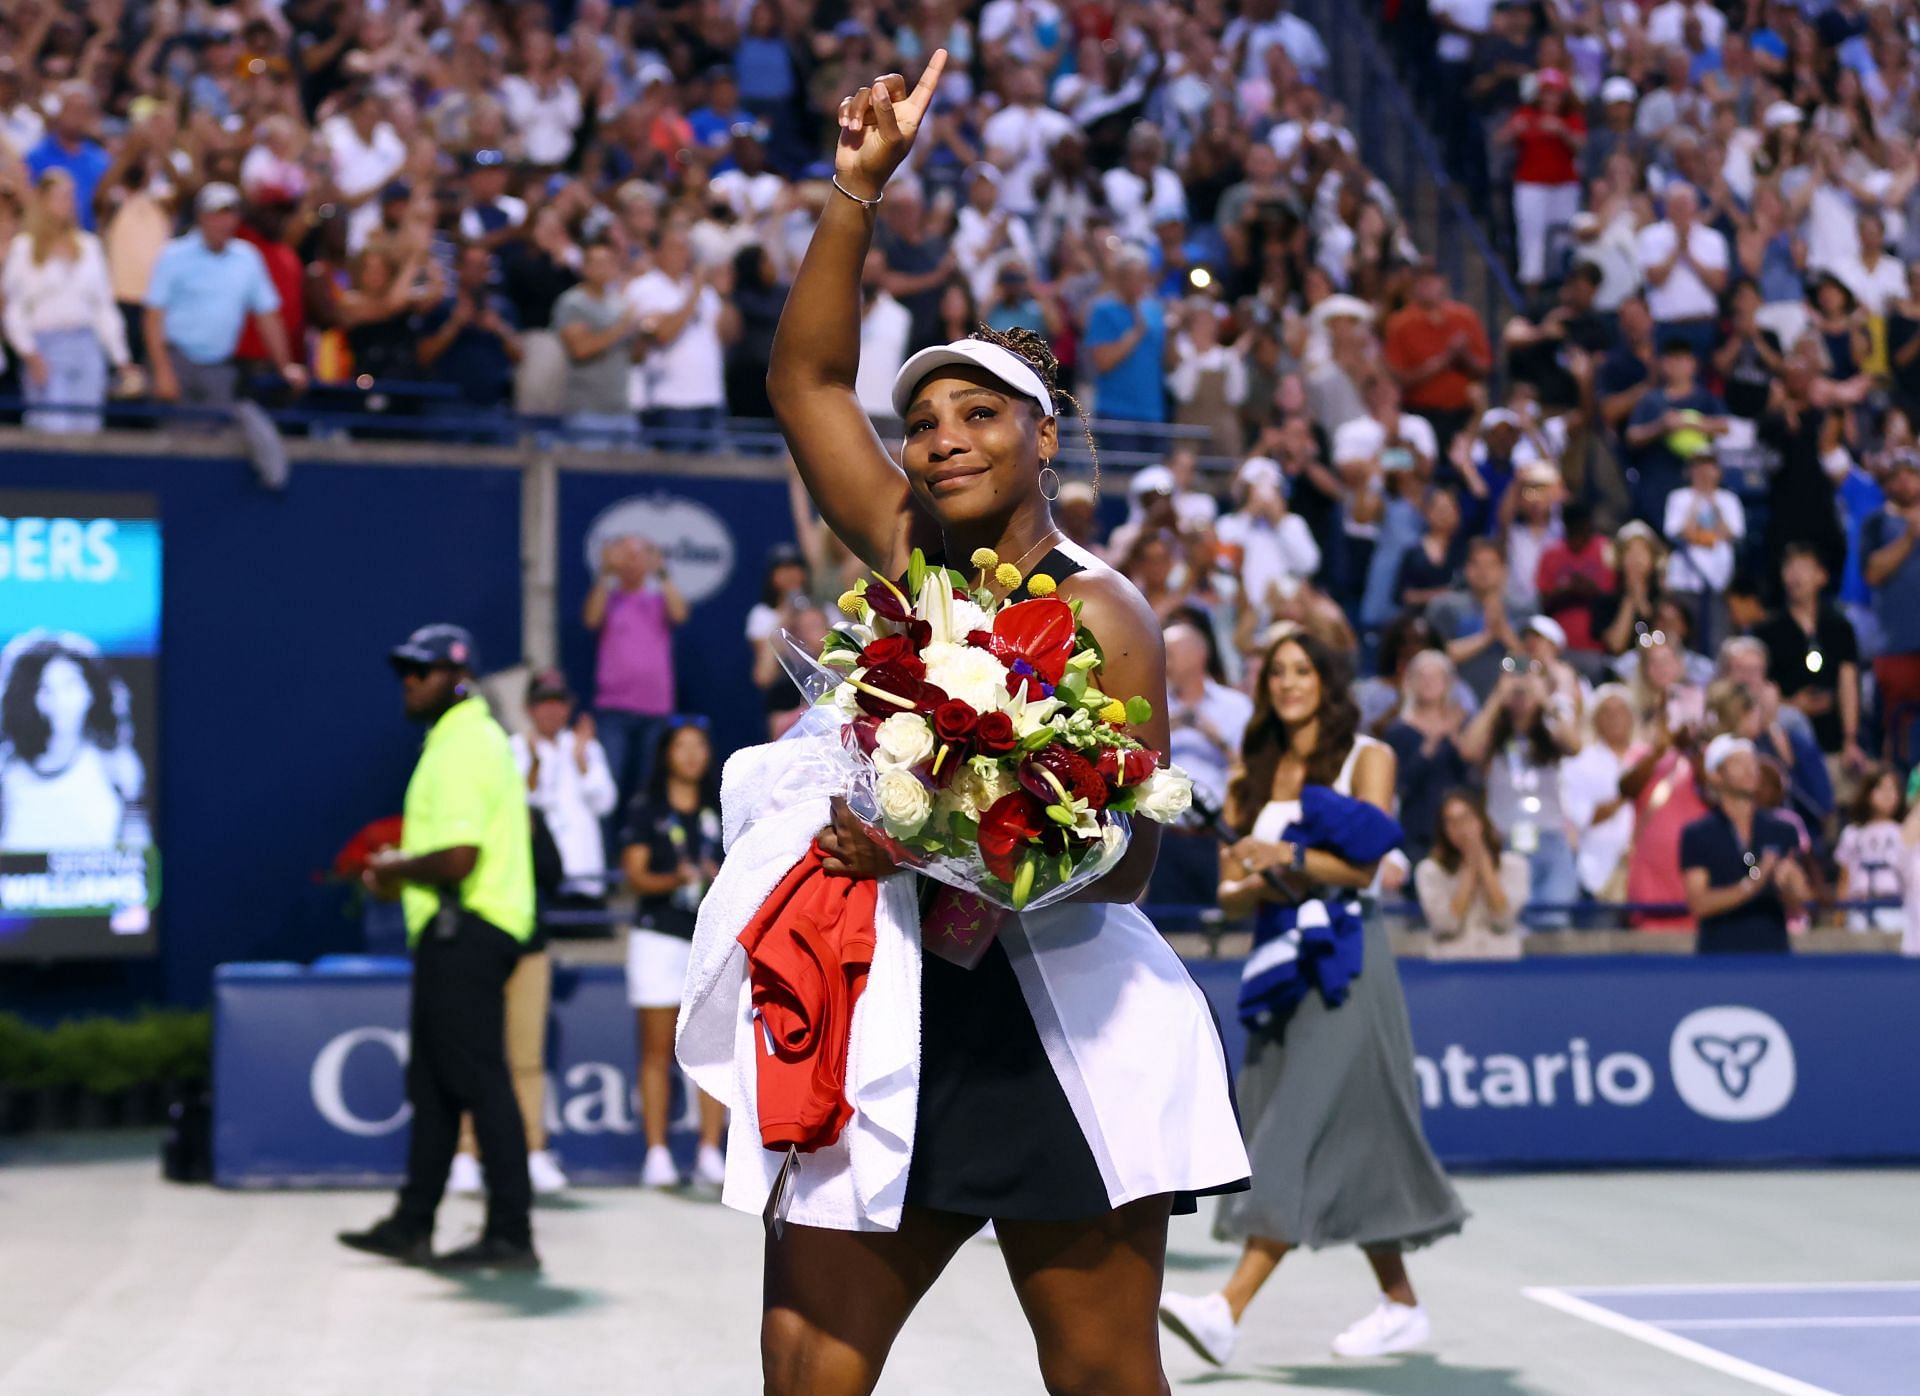 Serena Williams will bid goodbye to tennis after the US Open this year.